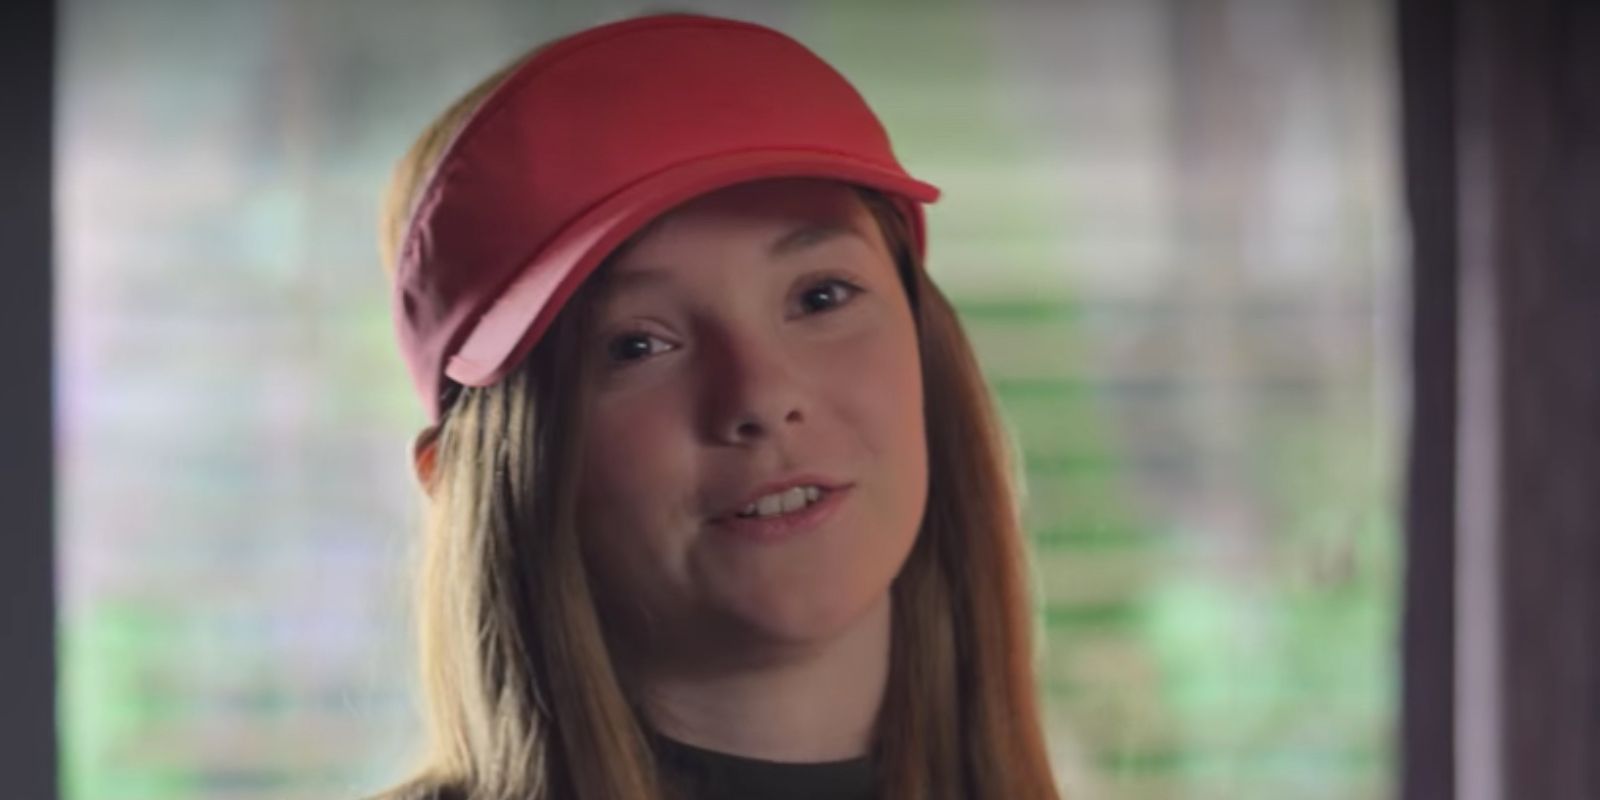 Kristy wearing a red baseball cap in The Baby-Sitters Club